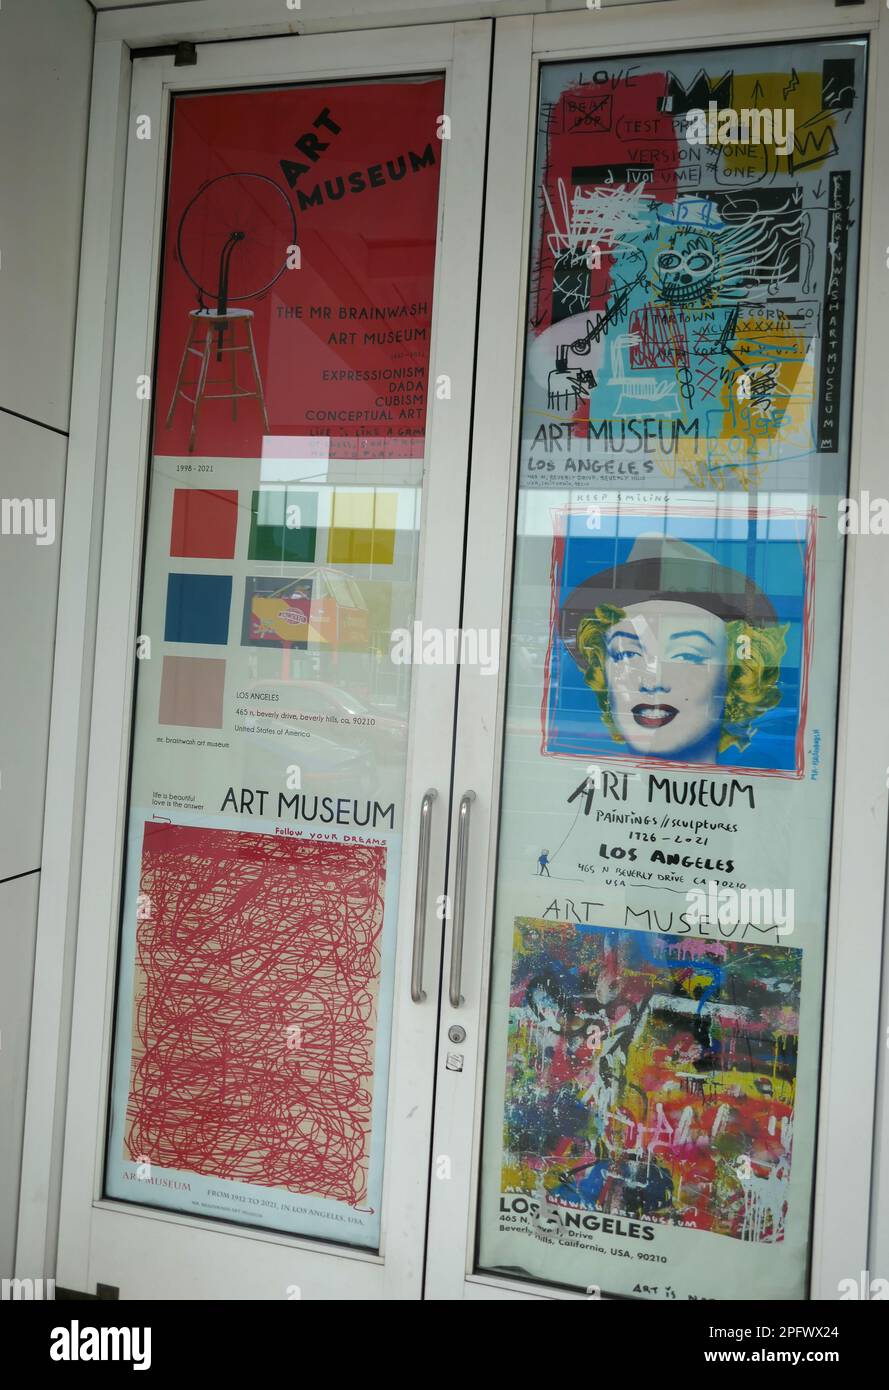 Beverly Hills, California, USA 18th March 2023 Marilyn Monroe Poster at Art Museum in Beverly Hills, California, USA. Photo by Barry King/Alamy Stock Photo Stock Photo